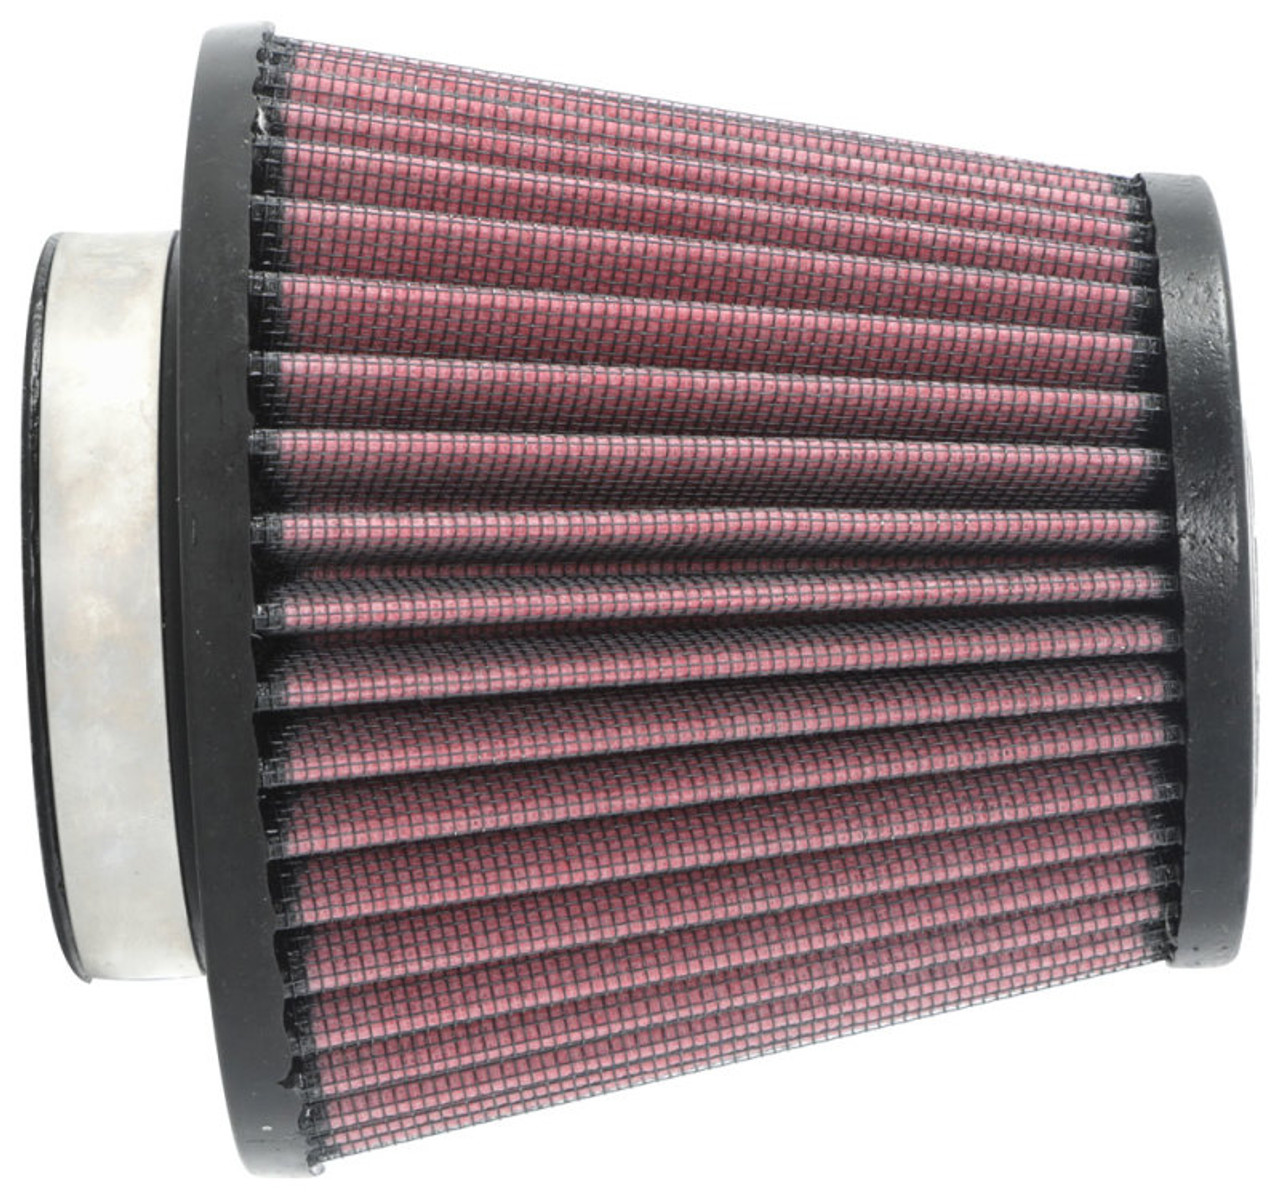 K&N Universal Clamp-On Air Filter 2-3/4in FLG / 5-1/16in B / 3-1/2in T / 4-3/8in H - RU-5135 Photo - out of package